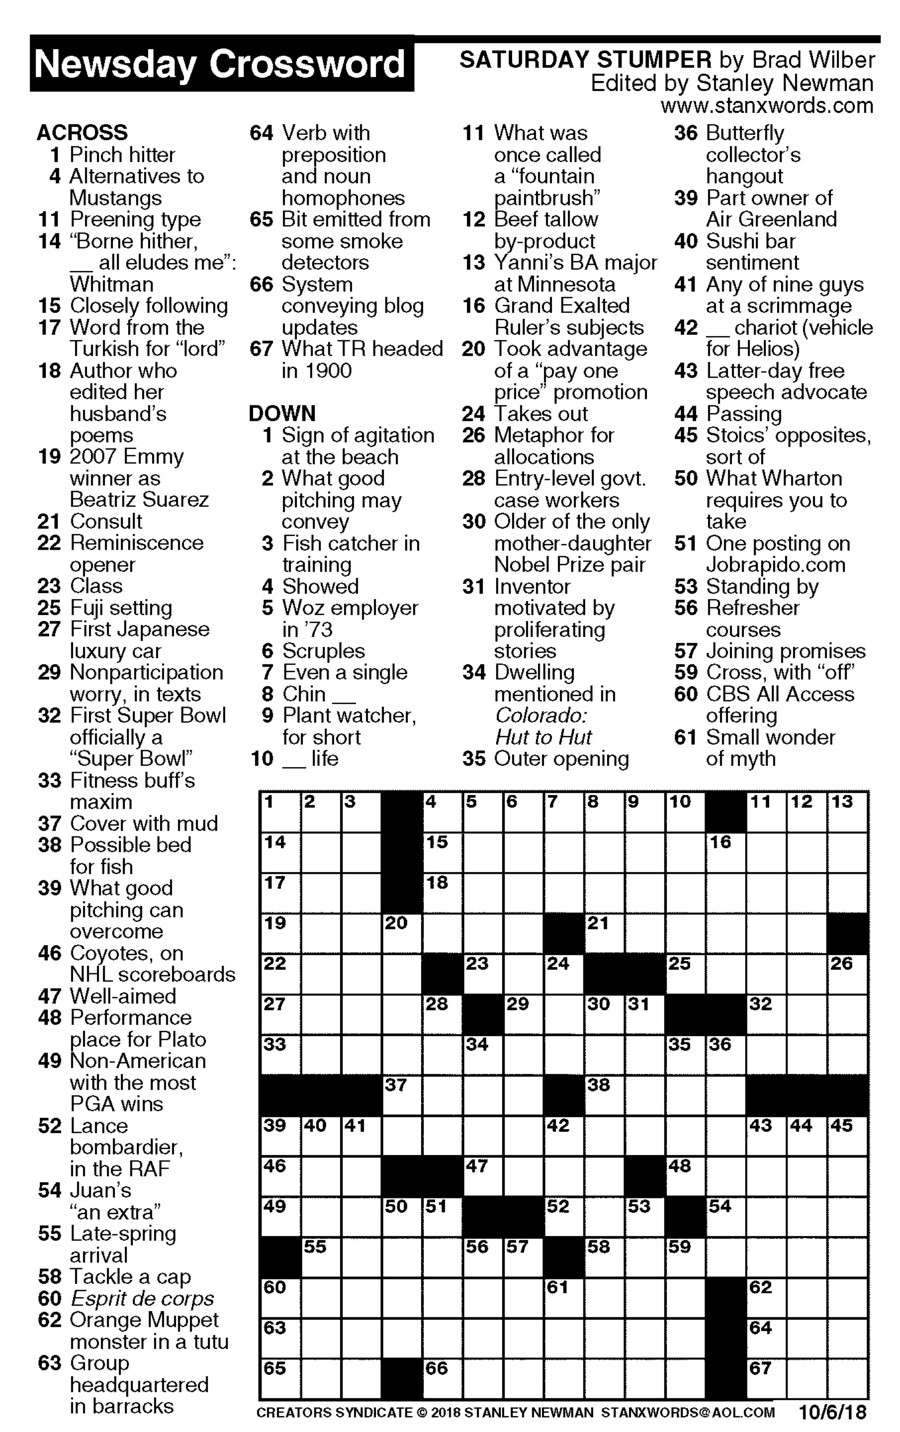 Newsday Crossword Puzzle For Oct 06, 2018,stanley Newman - October Crossword Puzzle Printable